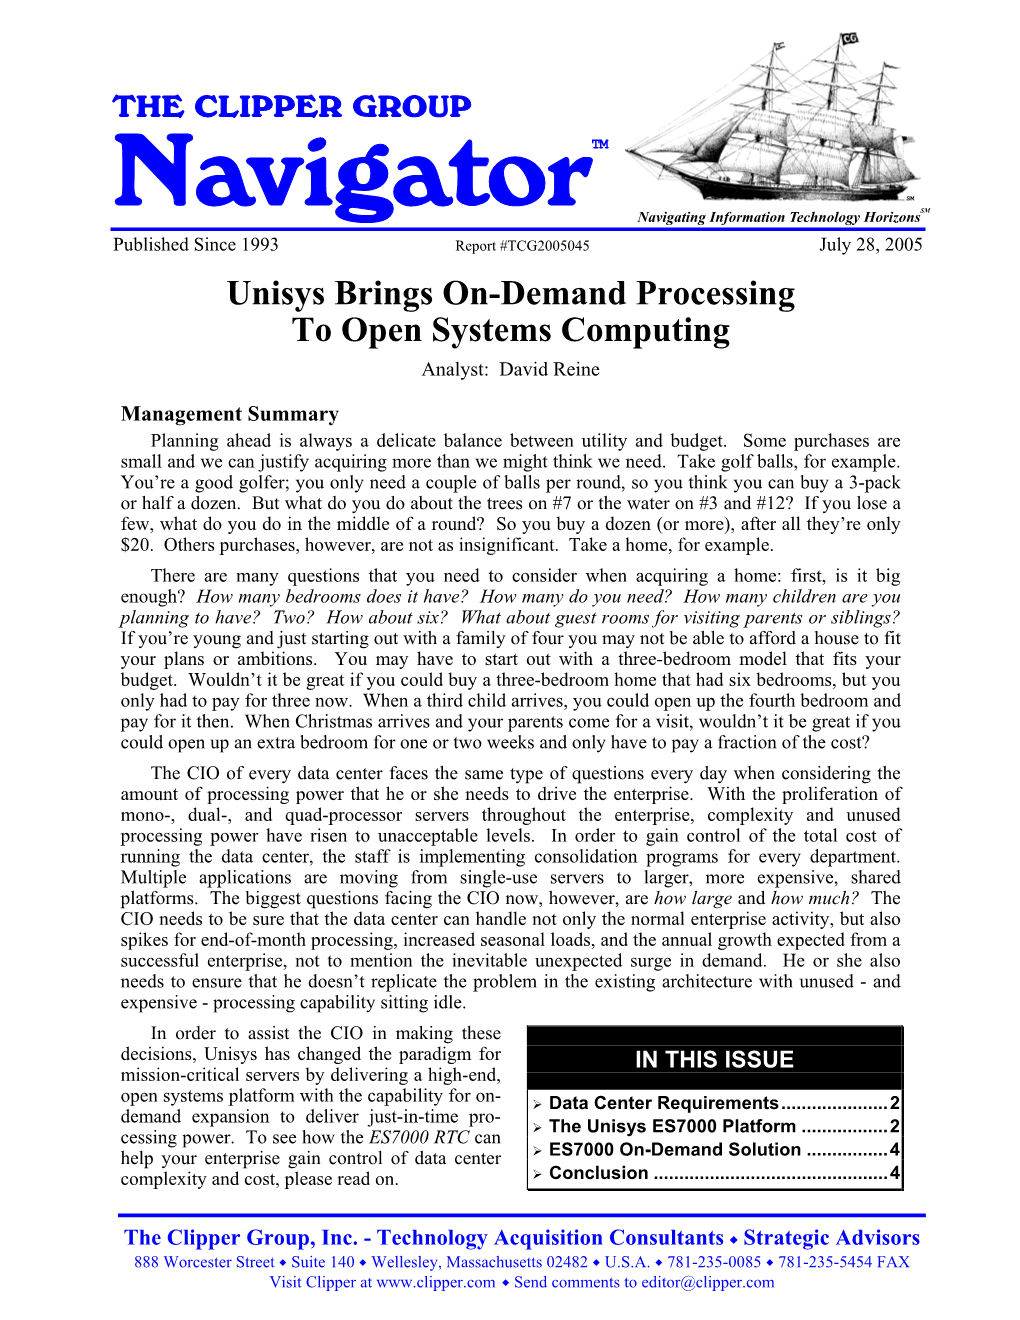 Unisys Brings On-Demand Processing to Open Systems Computing